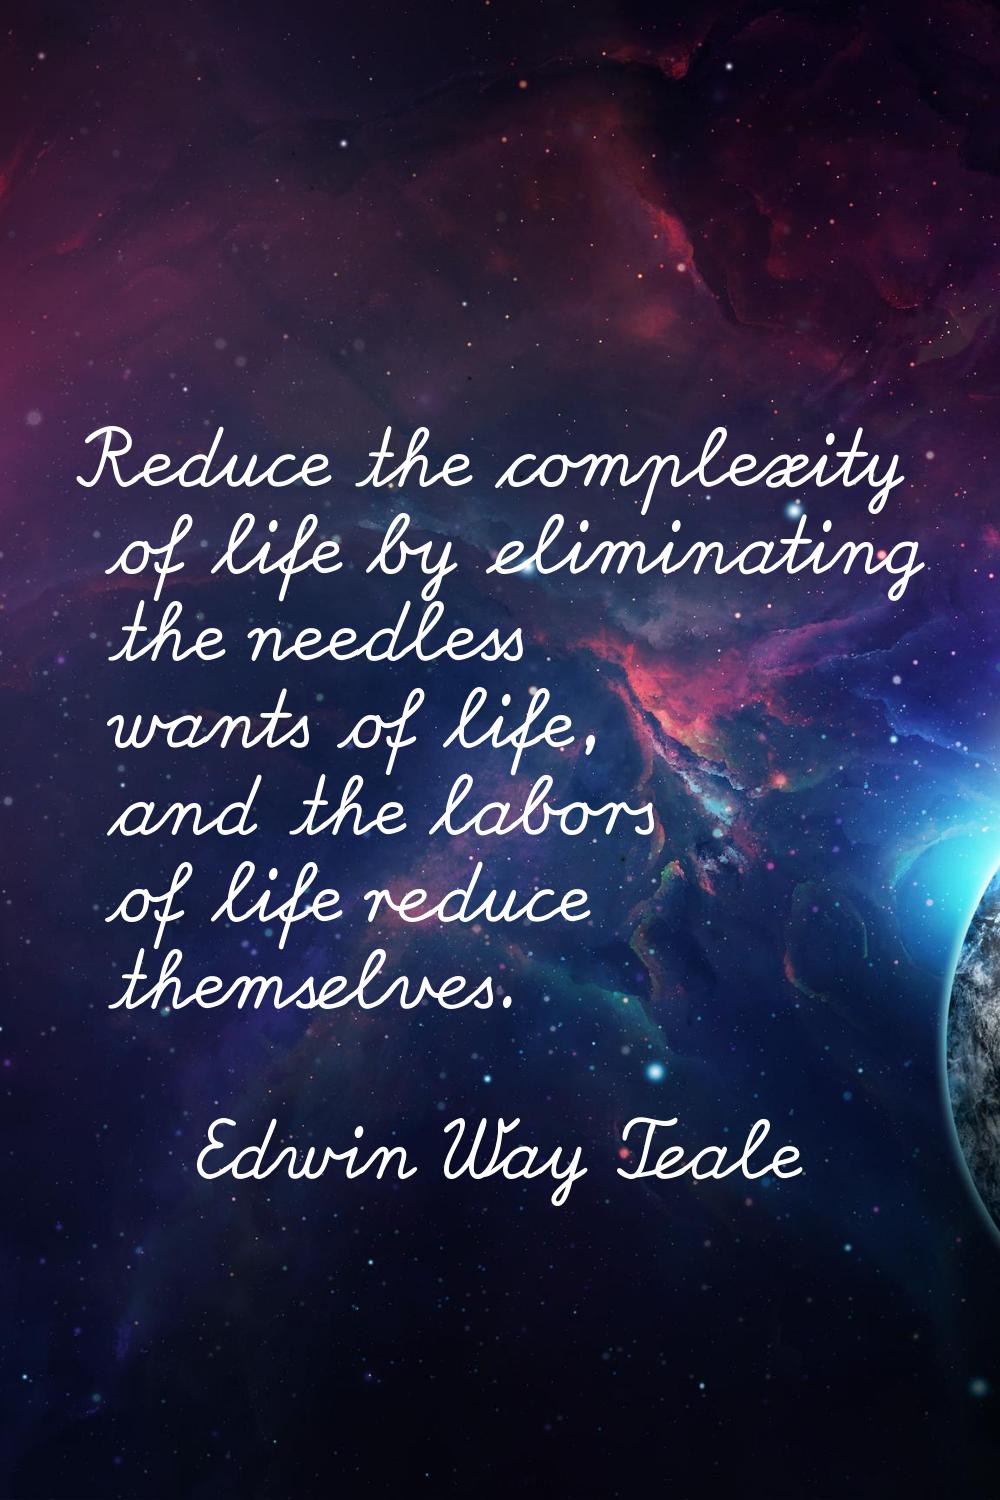 Reduce the complexity of life by eliminating the needless wants of life, and the labors of life red